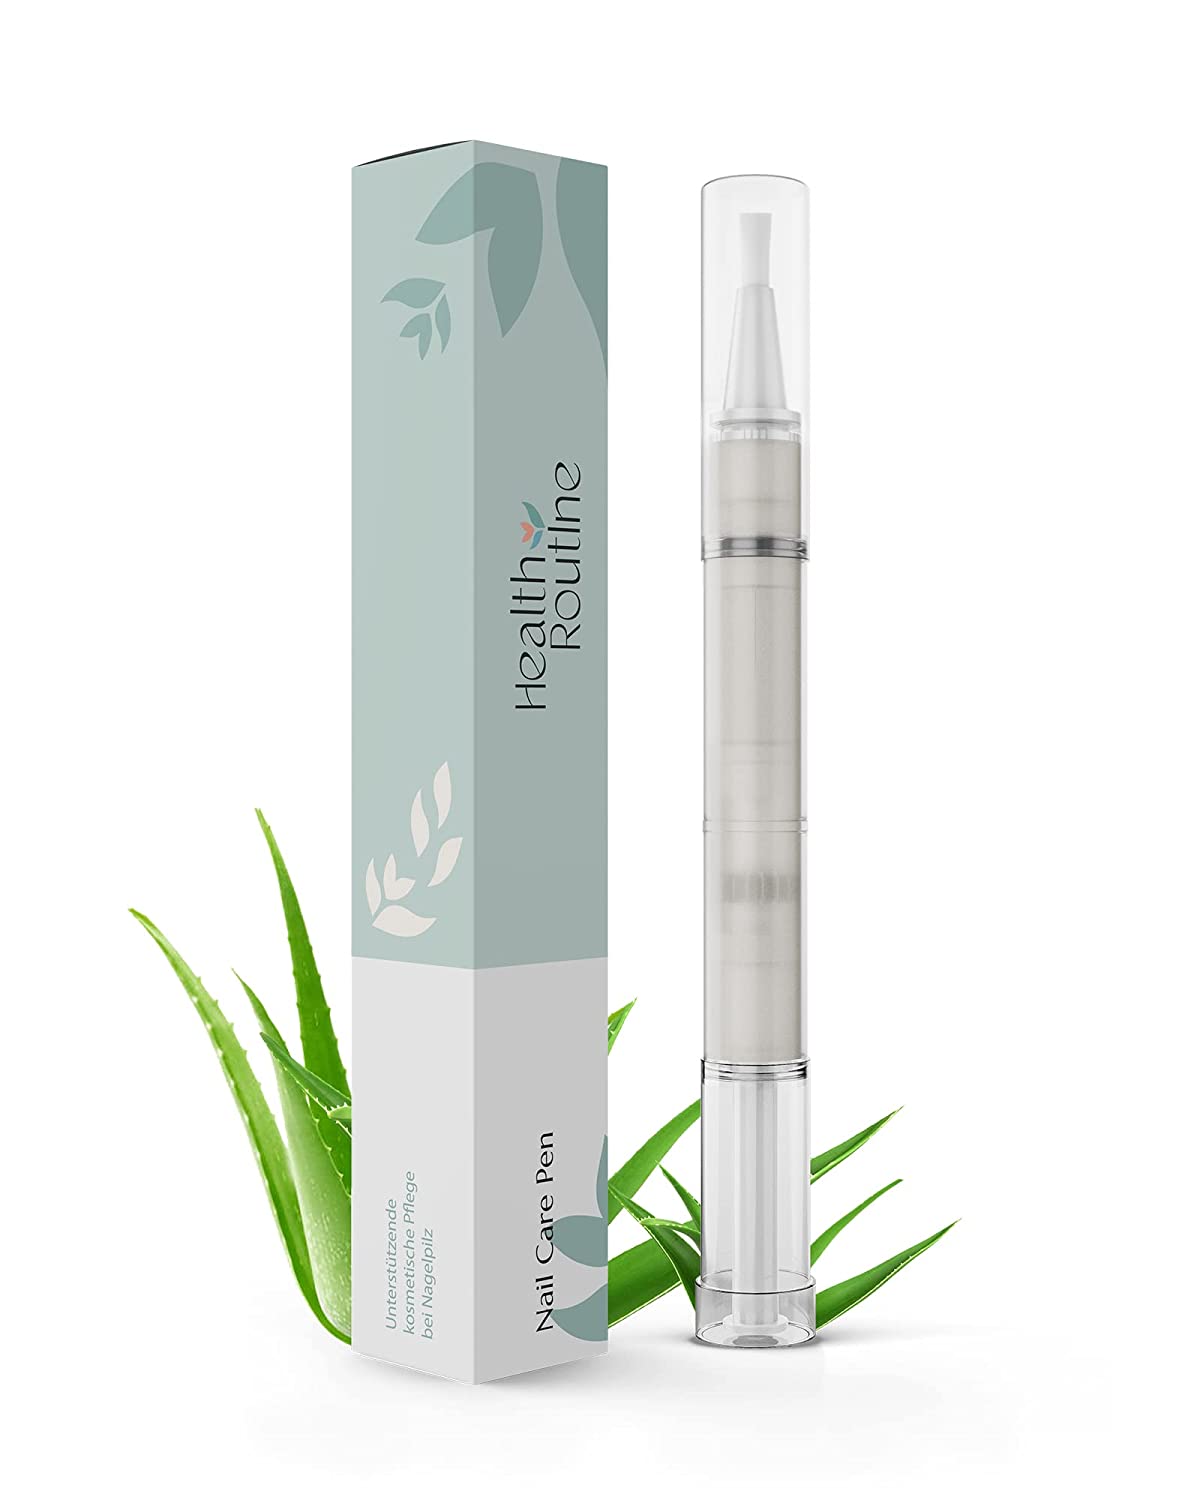 HealthRoutine Nail Care Pen / Cosmetic Nail Fungus Treatment fast intensive / For well-groomed fingernails & Toenails | With Aloe Vera & Tea Tree Oil